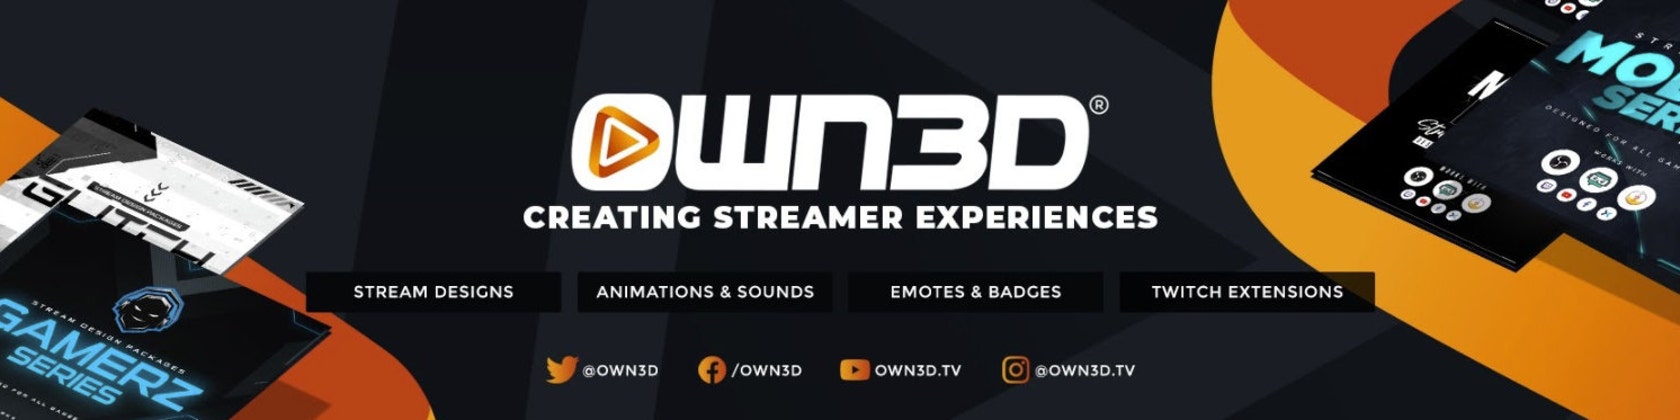 Chat Overlays / Screens / Banners for Twitch & More - OWN3D 🔥